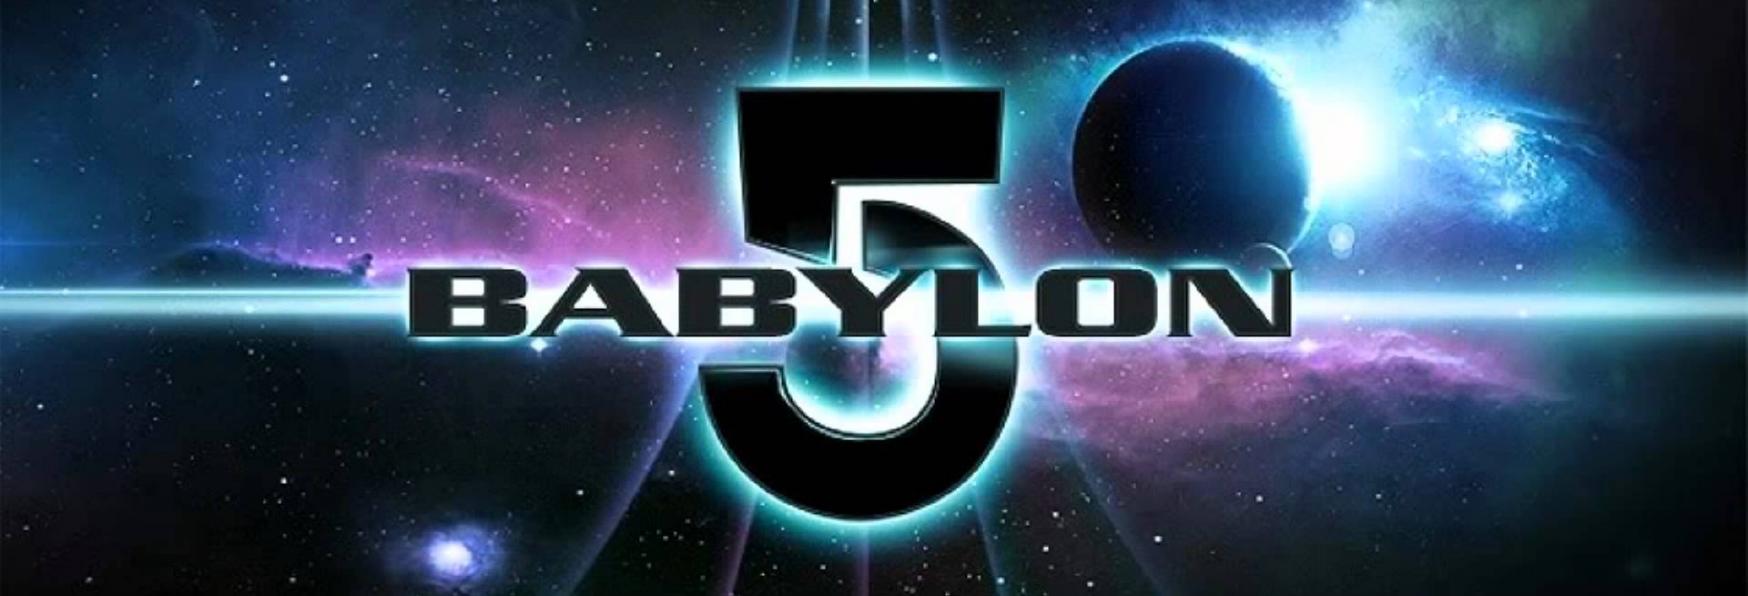 Babylon 5: Bad news coming for the reboot of the TV series?